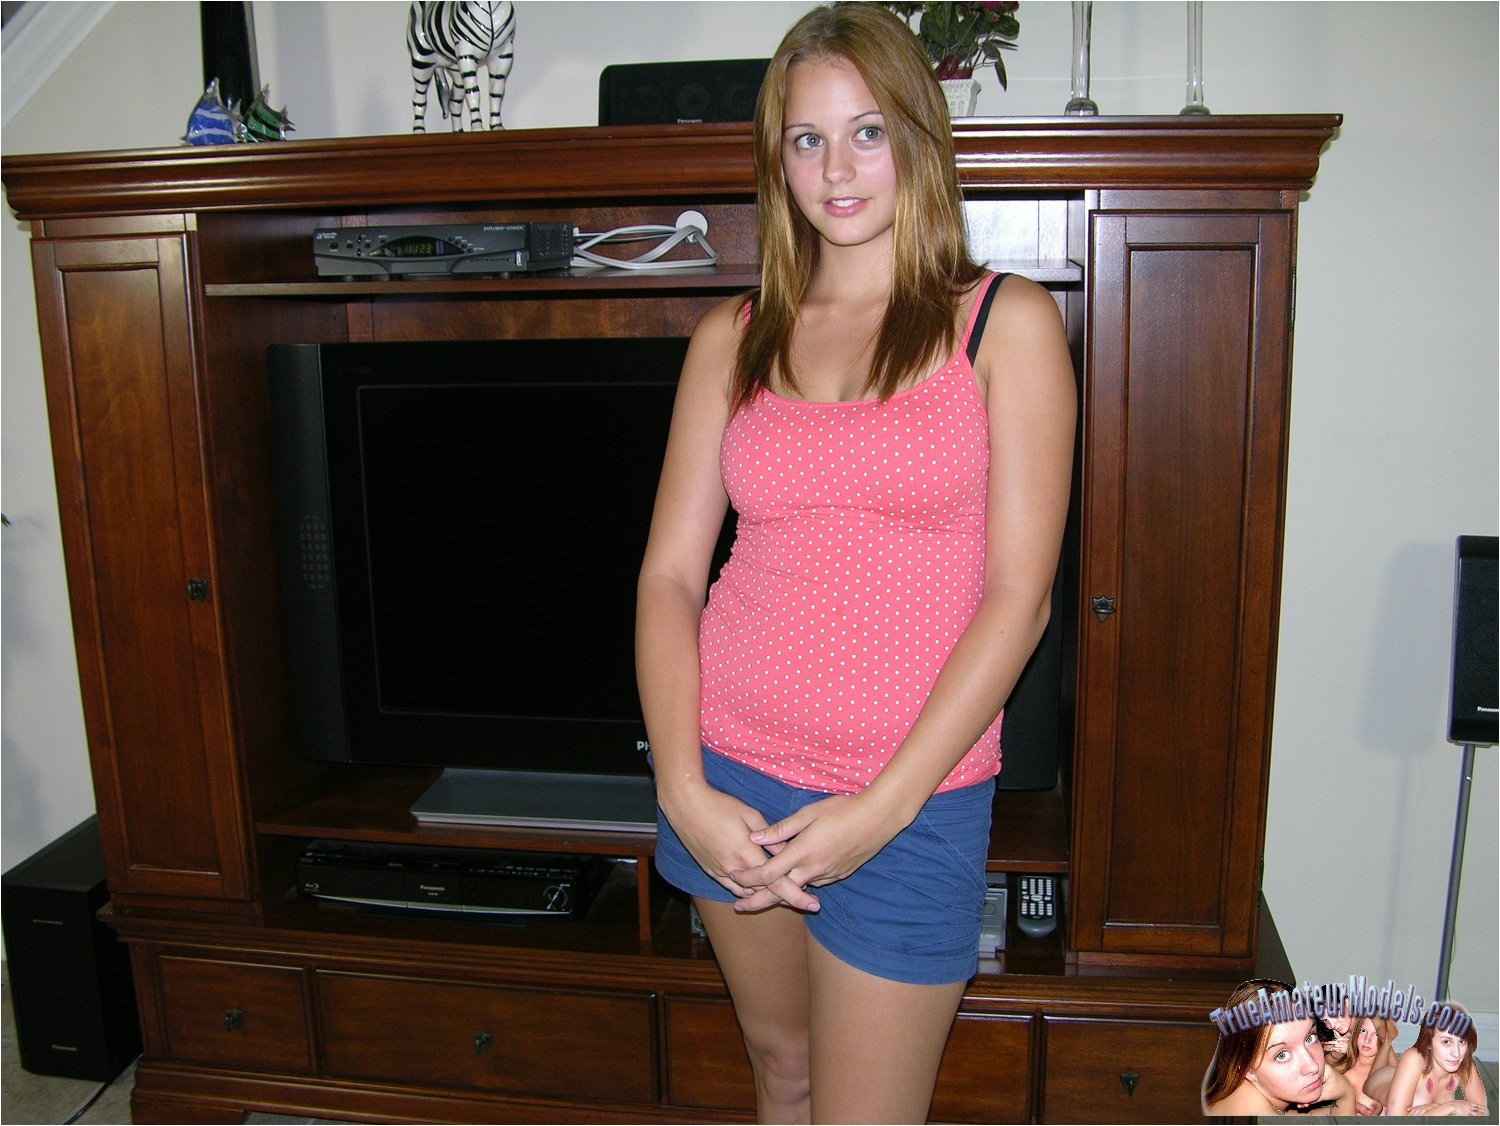 Cute And Innocent Looking Teen Spreads Nude #68247889